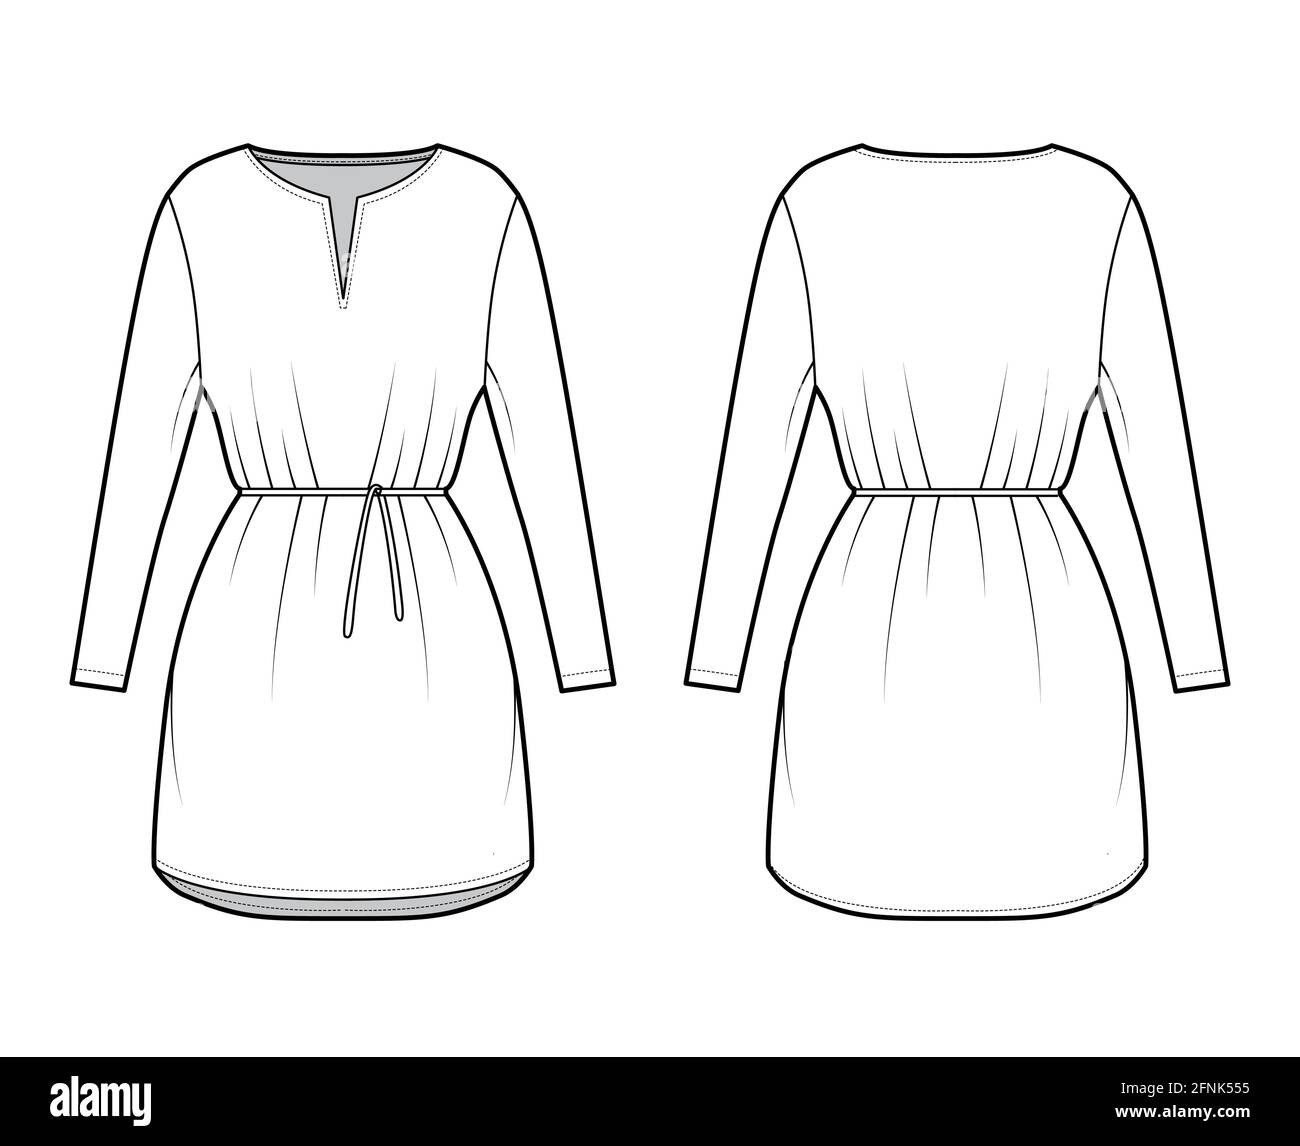 Dress tunic technical fashion illustration with tie, long sleeves, oversized body, mini length skirt, slashed neck. Flat apparel front, back, white color style. Women, men CAD mockup Stock Vector